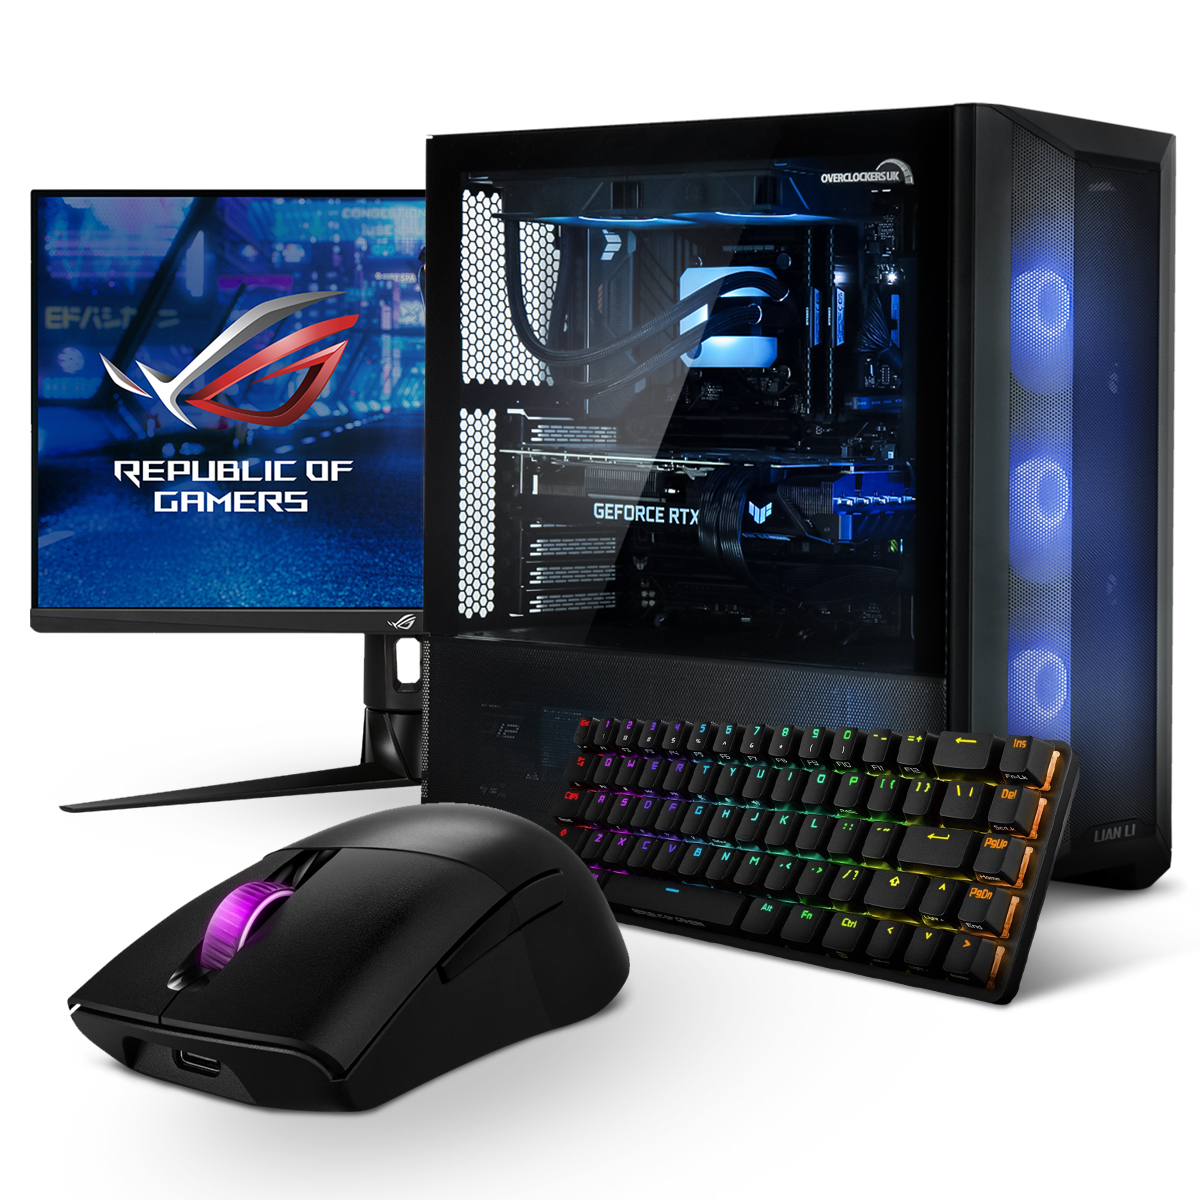  - Refract Azure 1440p Gaming PC Complete System Bundle